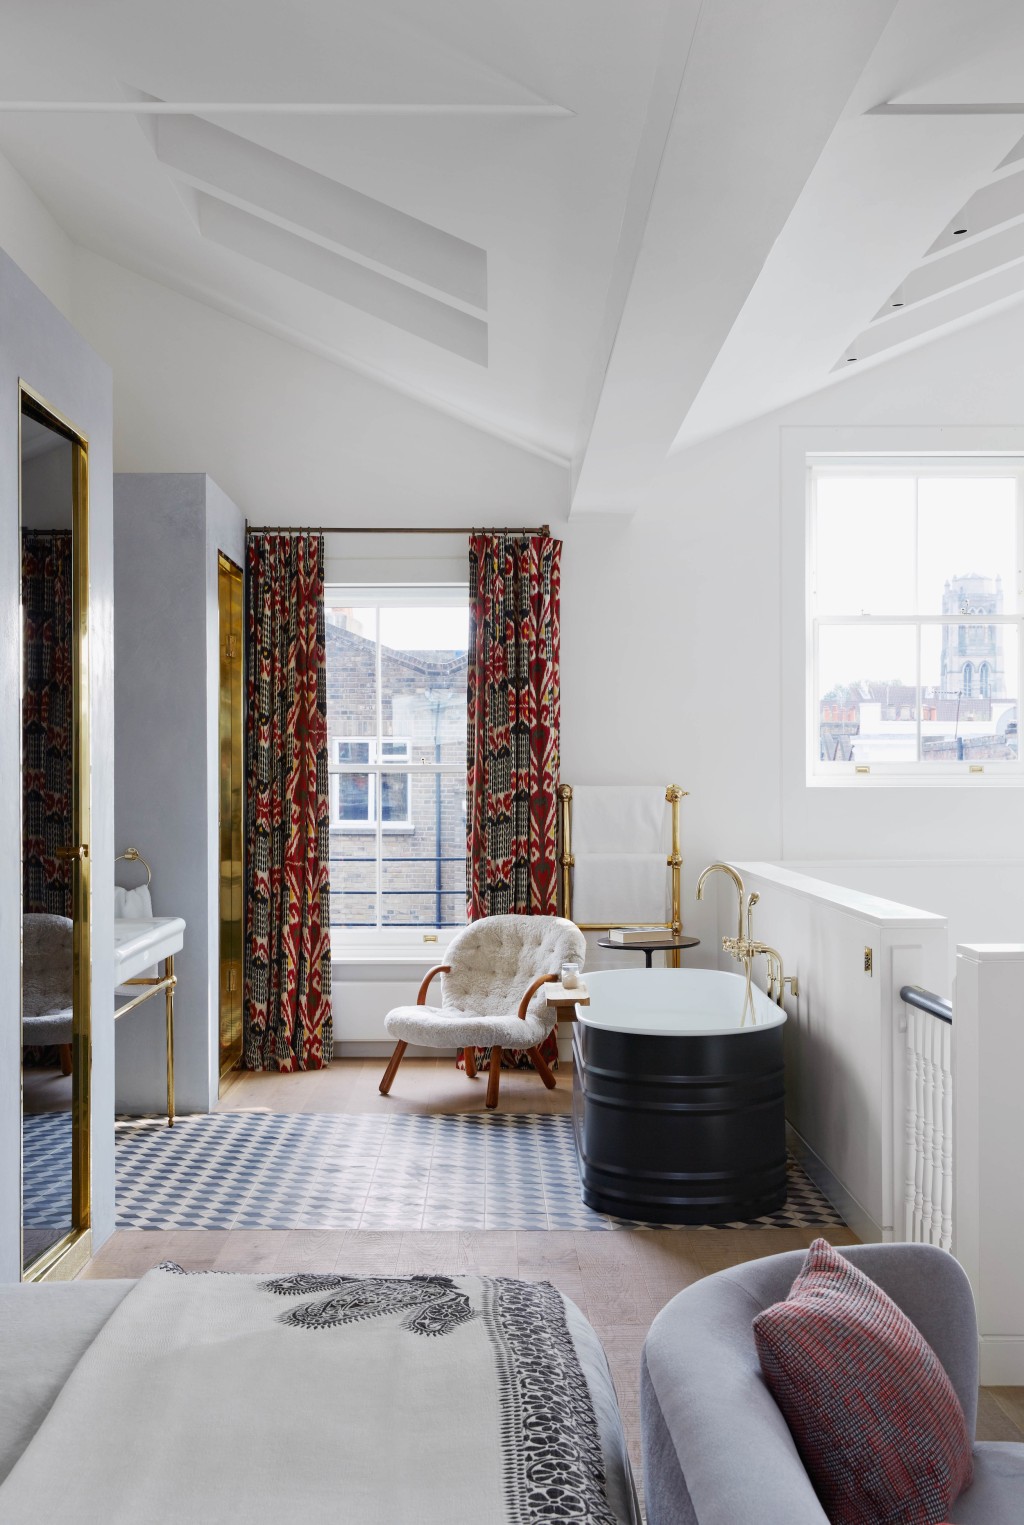 Feature, Notting Hill town house, contemporary, modern, graphic, geometric patterns, family home, bright, interior, open-plan main bedroom, bathroom, free-standing bath, chair, tiles